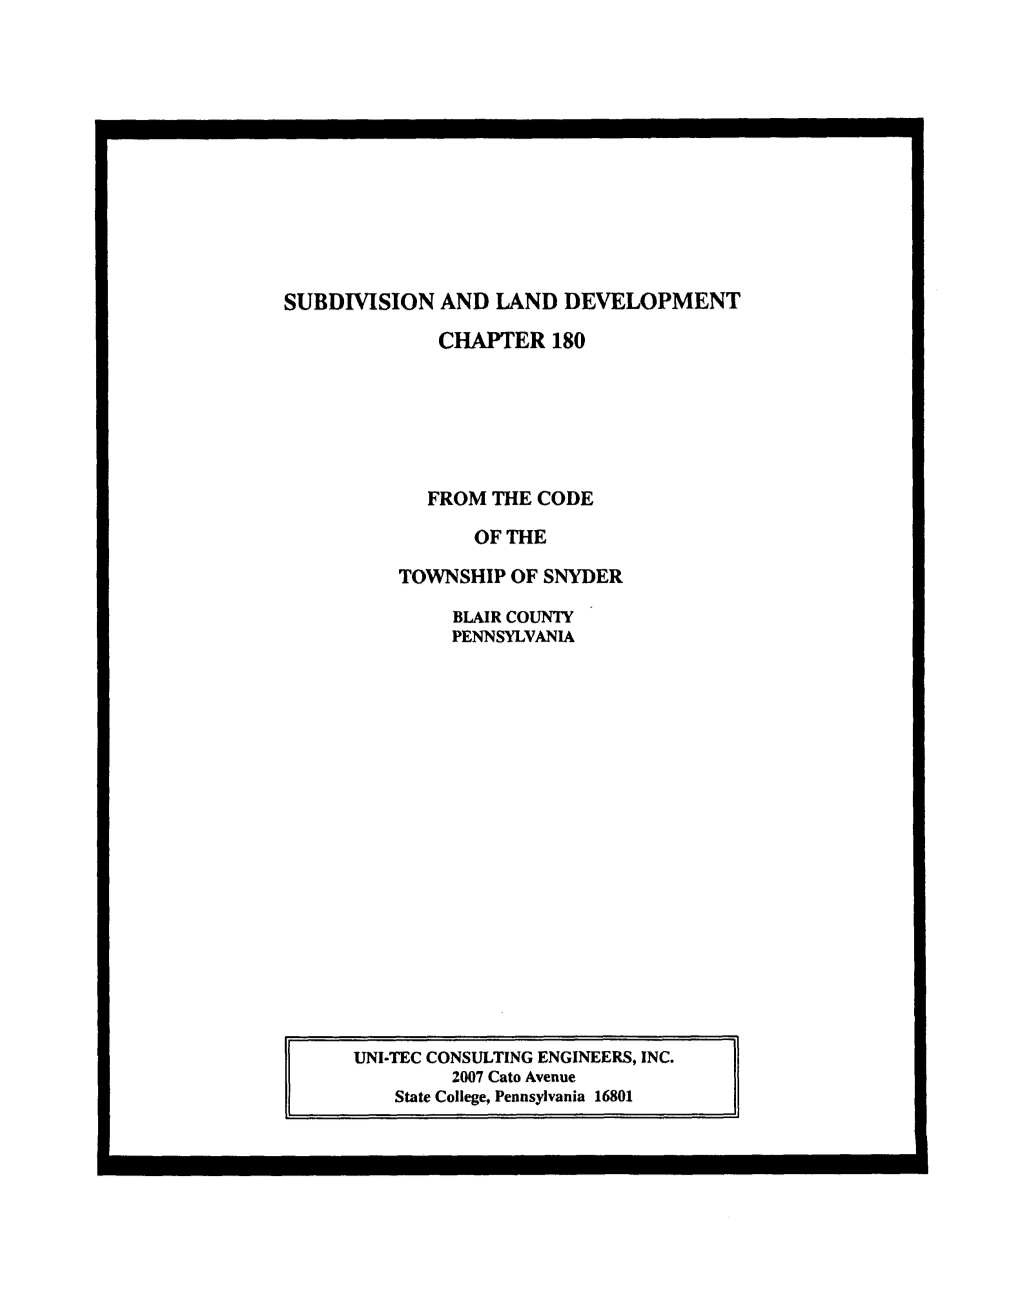 Subdmsion and Land Development Chapter 180